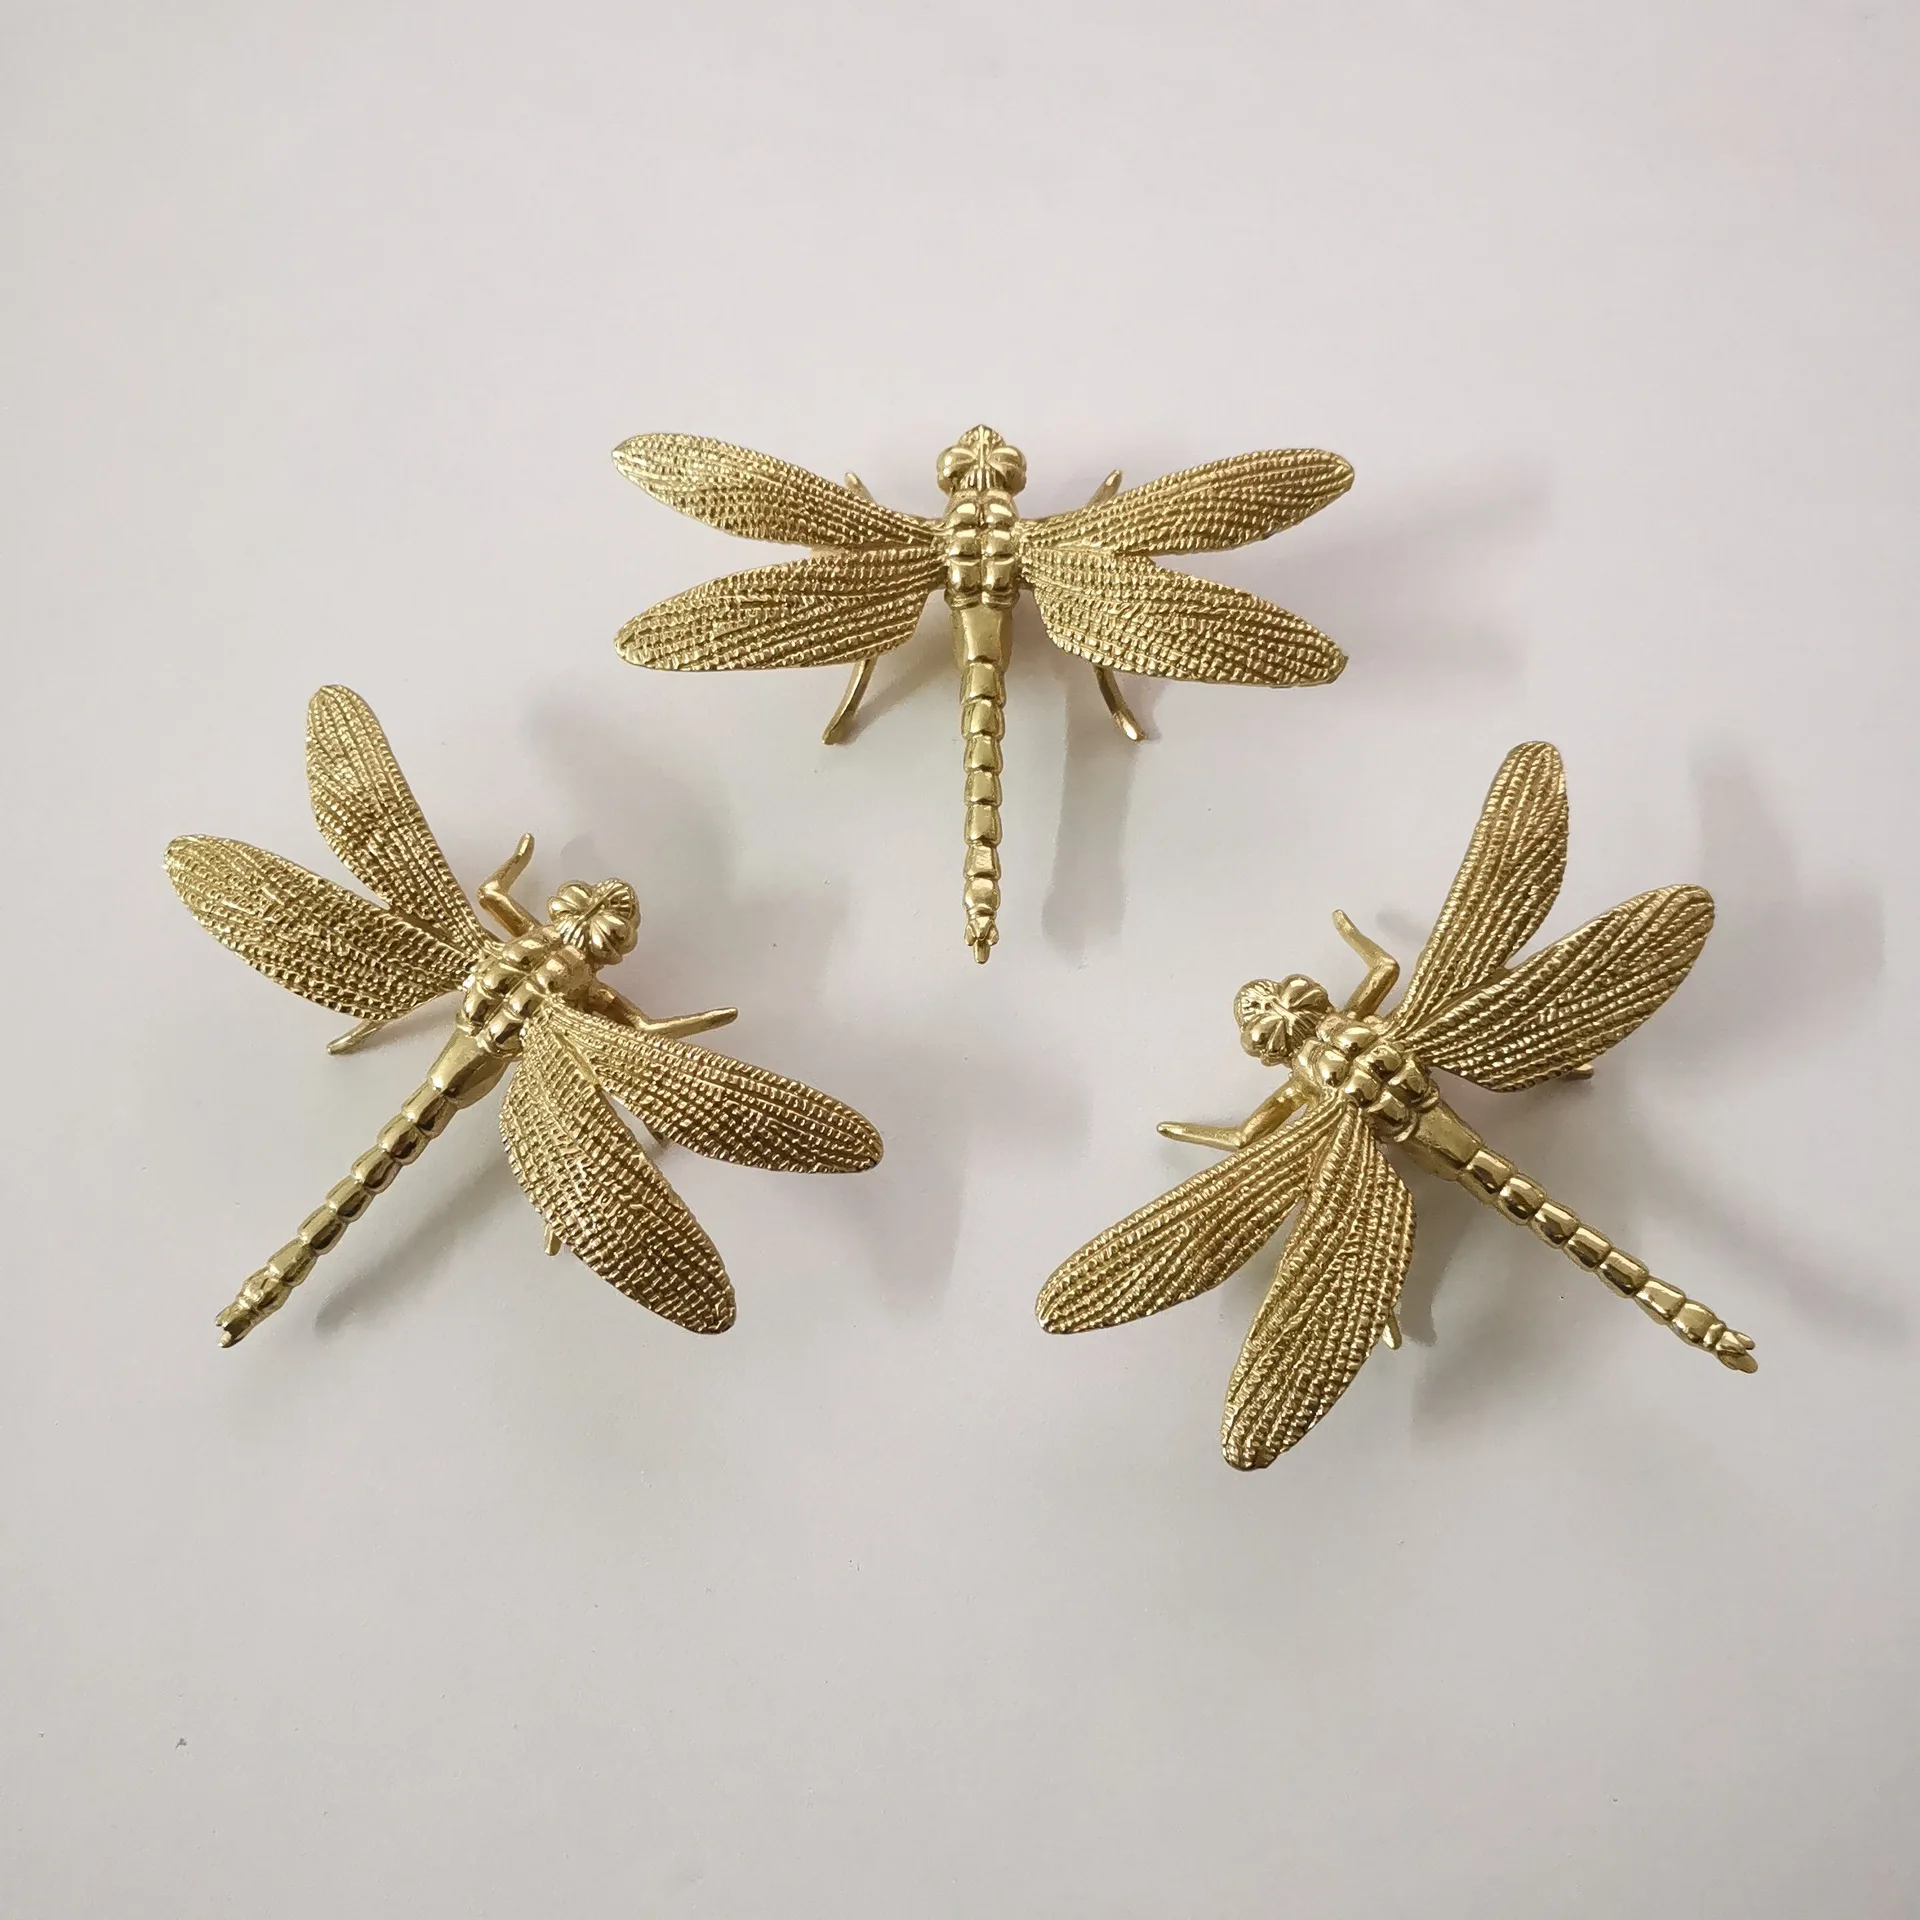 1Pc Dragonfly Brass Handle Pure Copper Drawer Cabinet Door Knob Diy Gold Furniture Pulls Handles